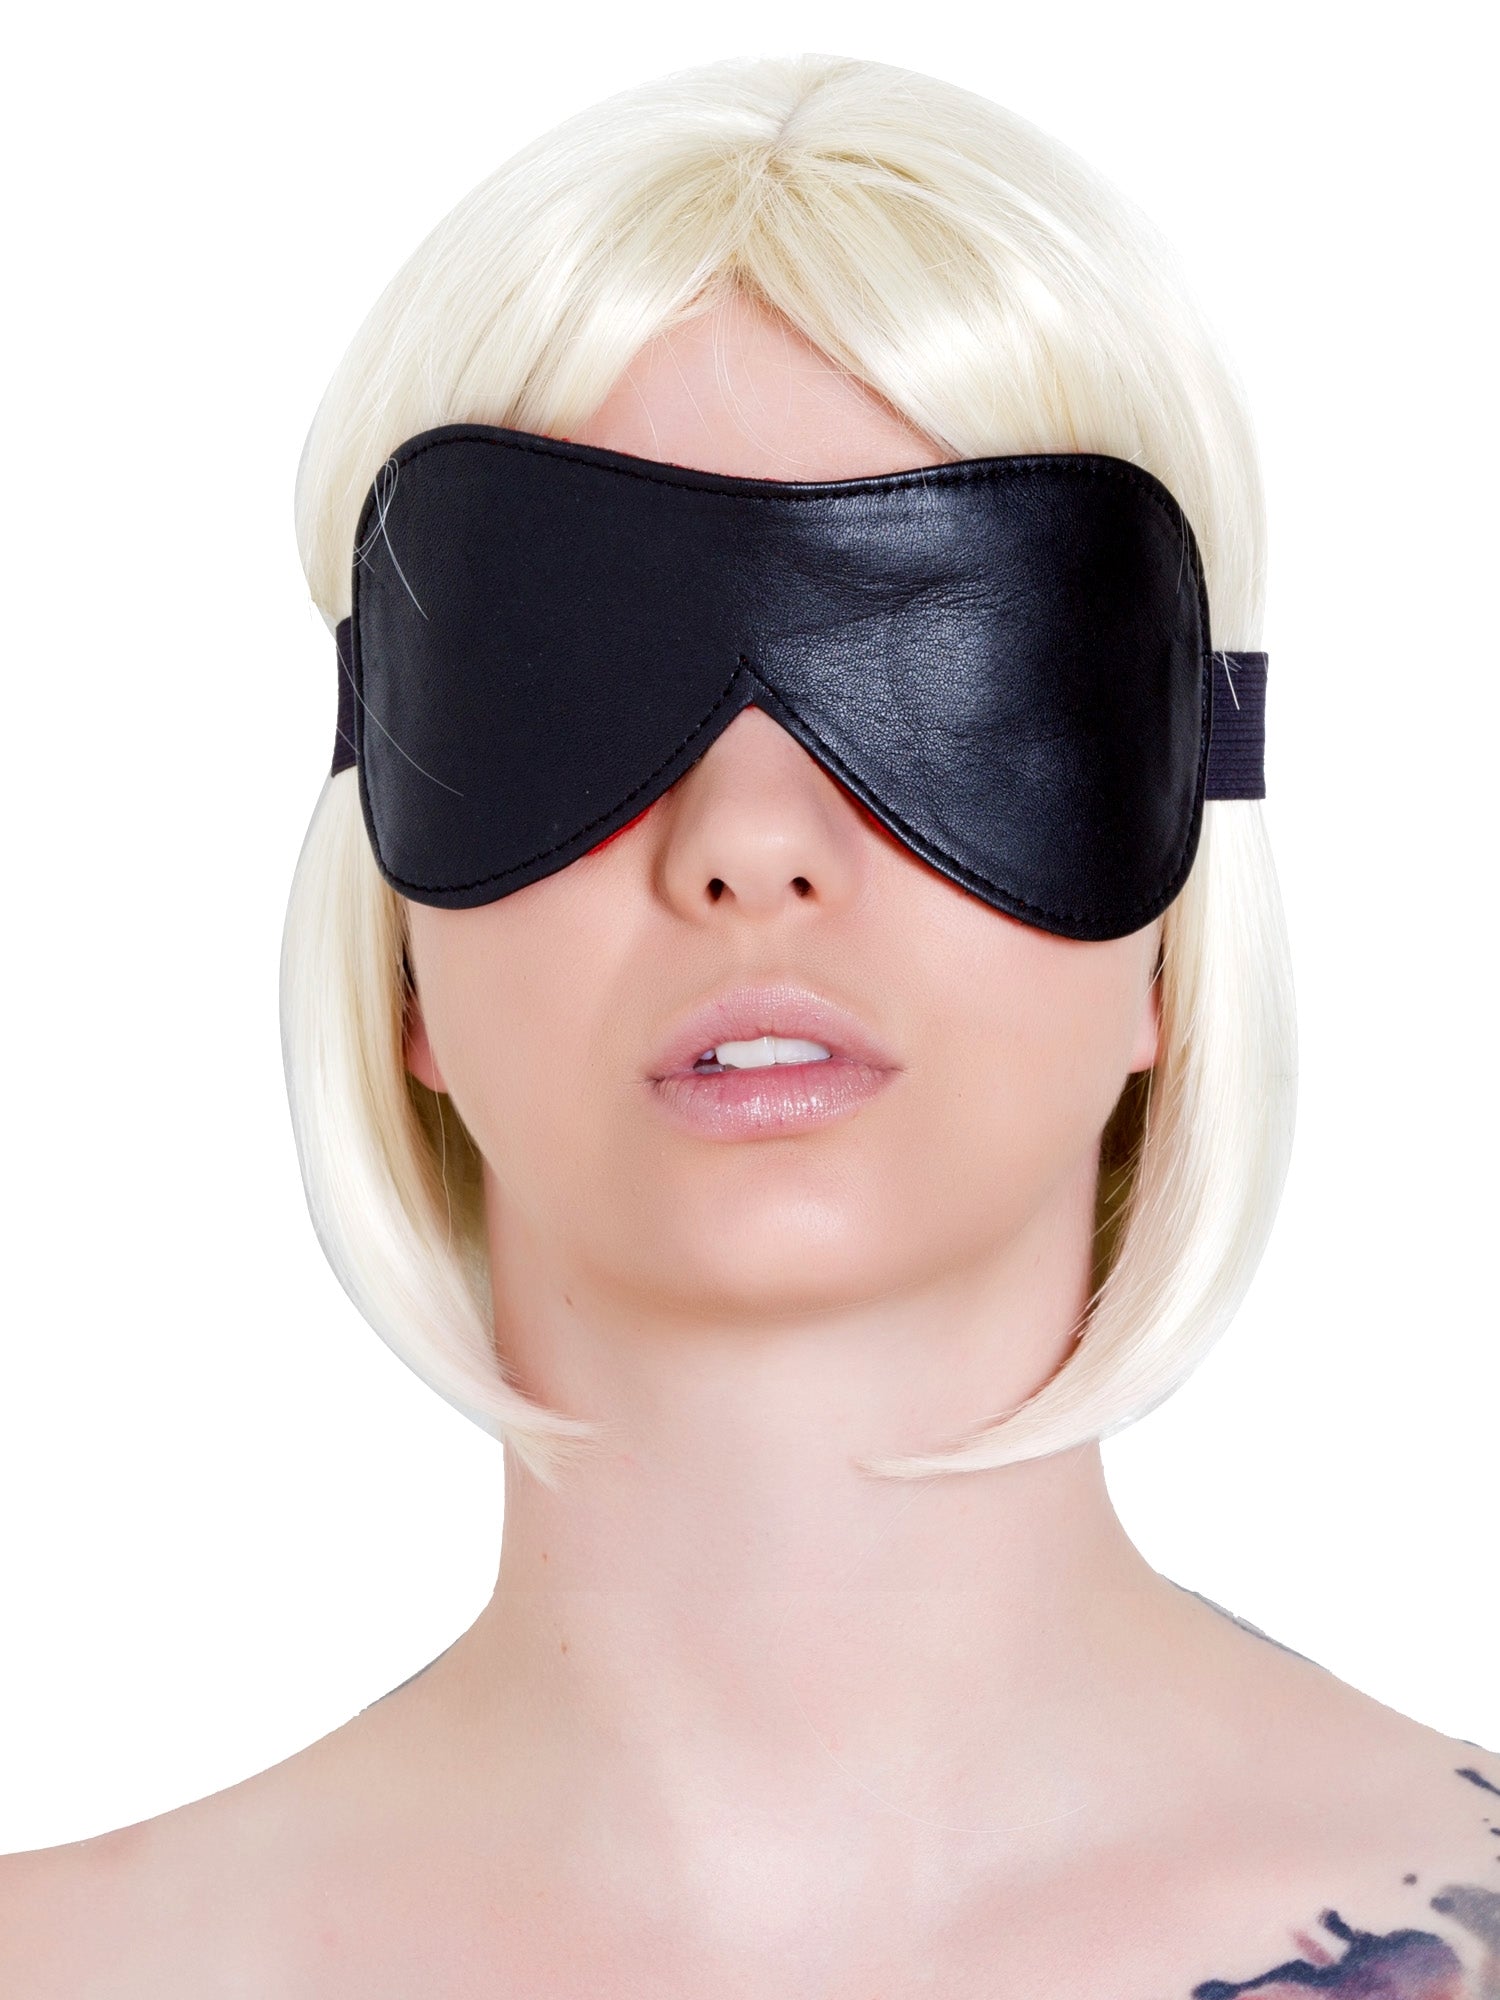 Blindfolds- Plain or Decorated- leather or fur lined,  Hypoallergenic/Contact Friendly (prices vary)